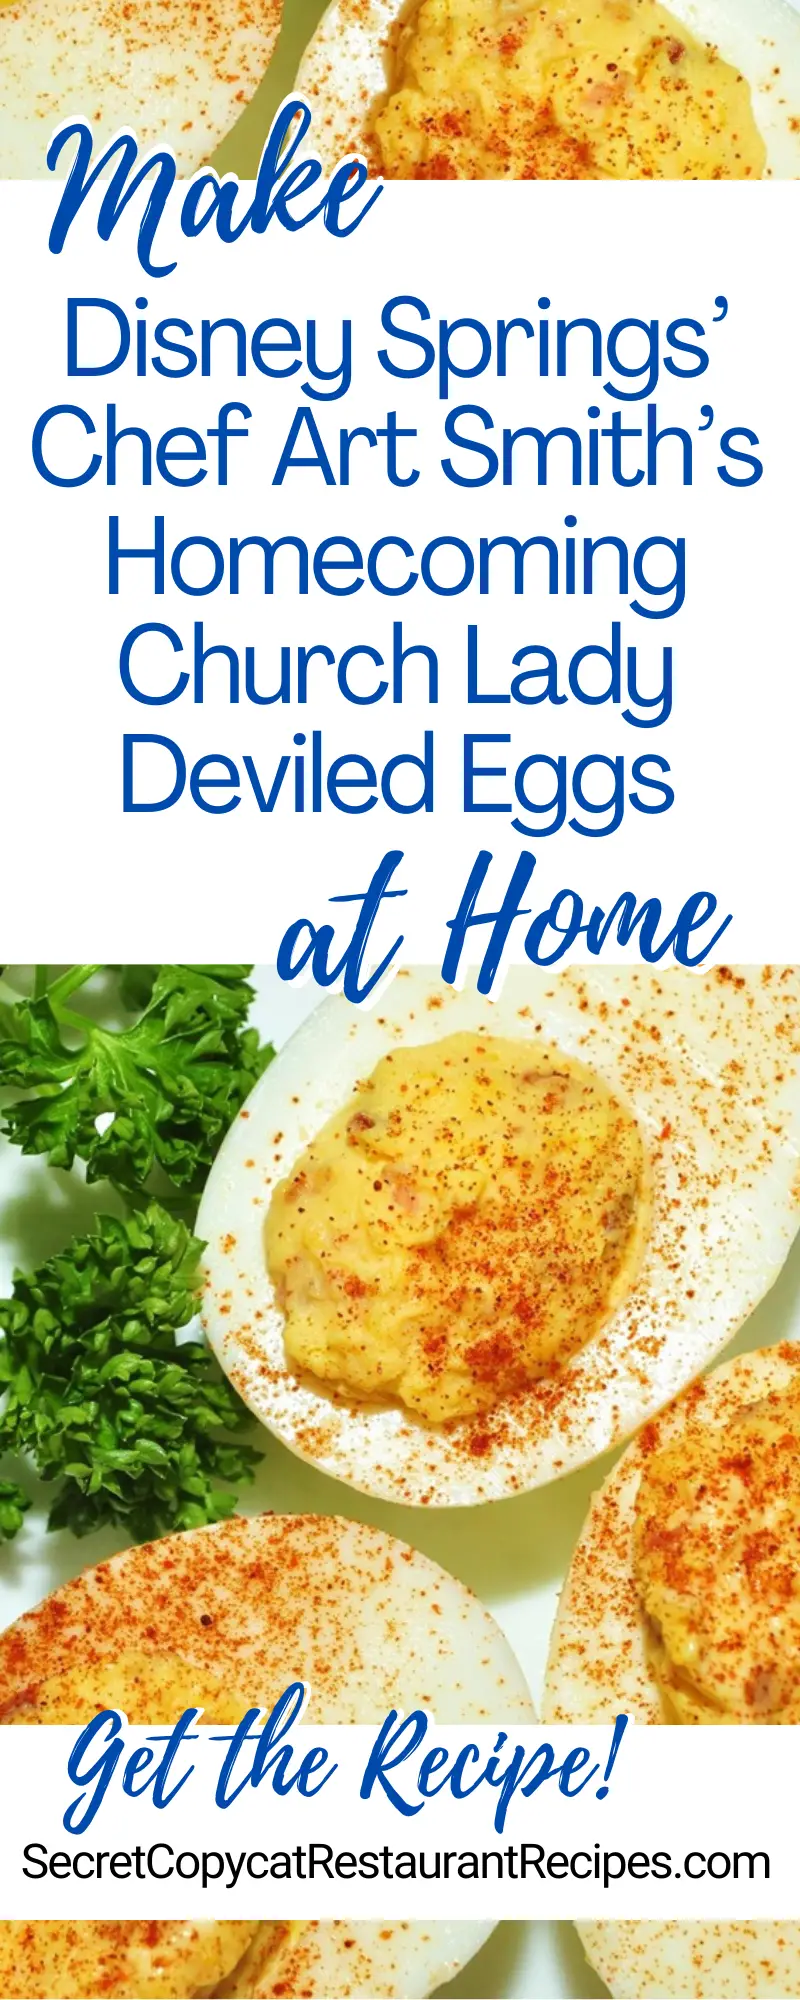 Disney Springs’ Chef Art Smith’s Homecoming Church Lady Deviled Eggs Recipe